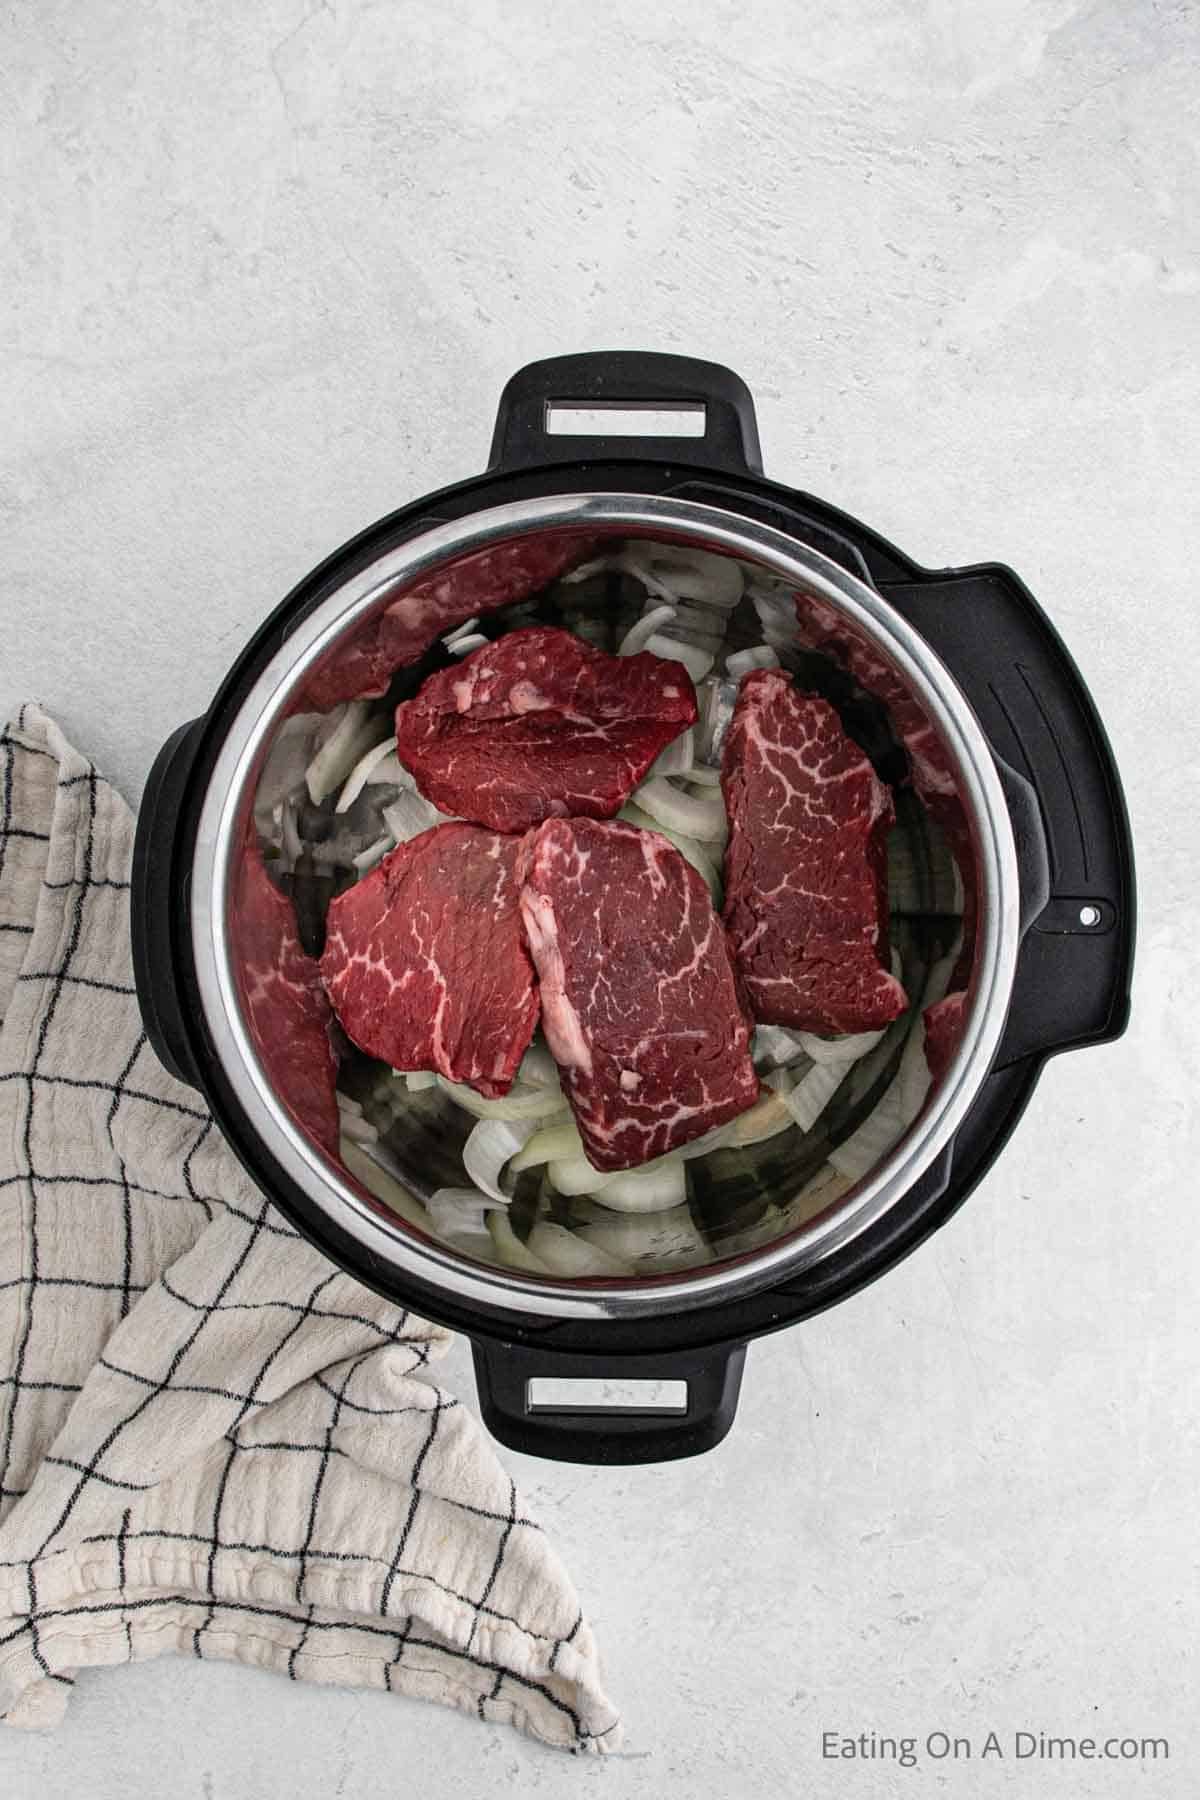 Topping the steak on the slice ones in the instant pot